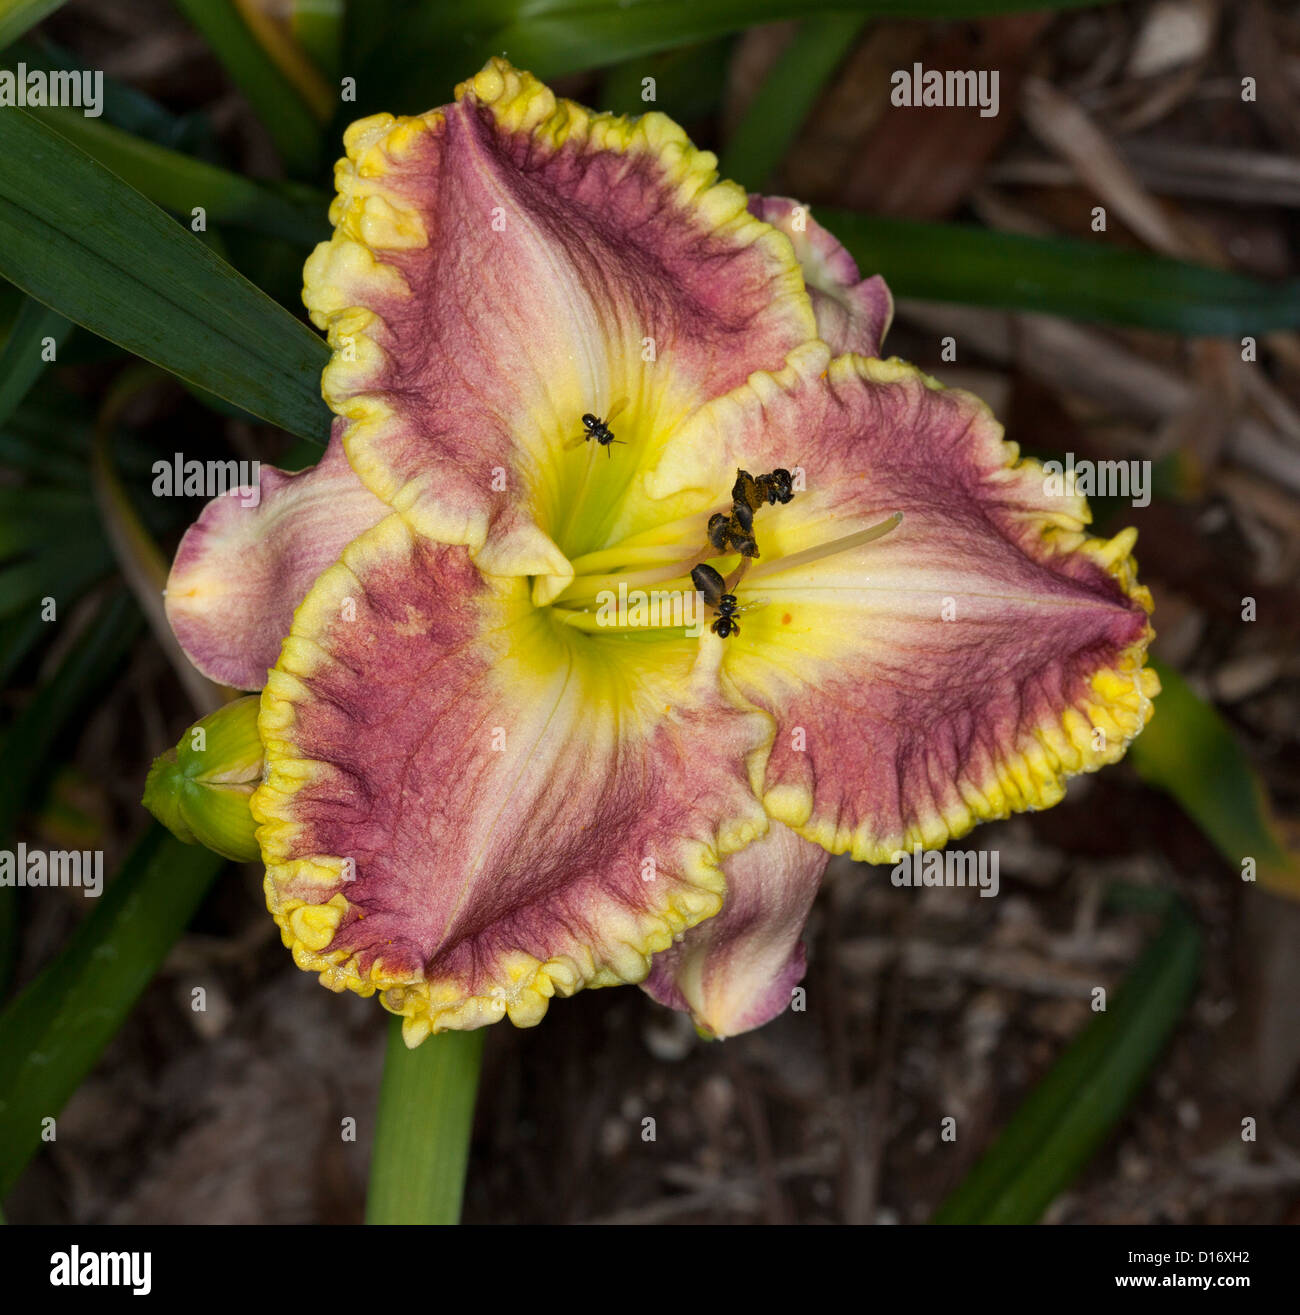 Spectacular red and yellow flower of daylily with frilly edged petals - Hemerocallis 'Alexa Kathryn' with Australian native bees Stock Photo